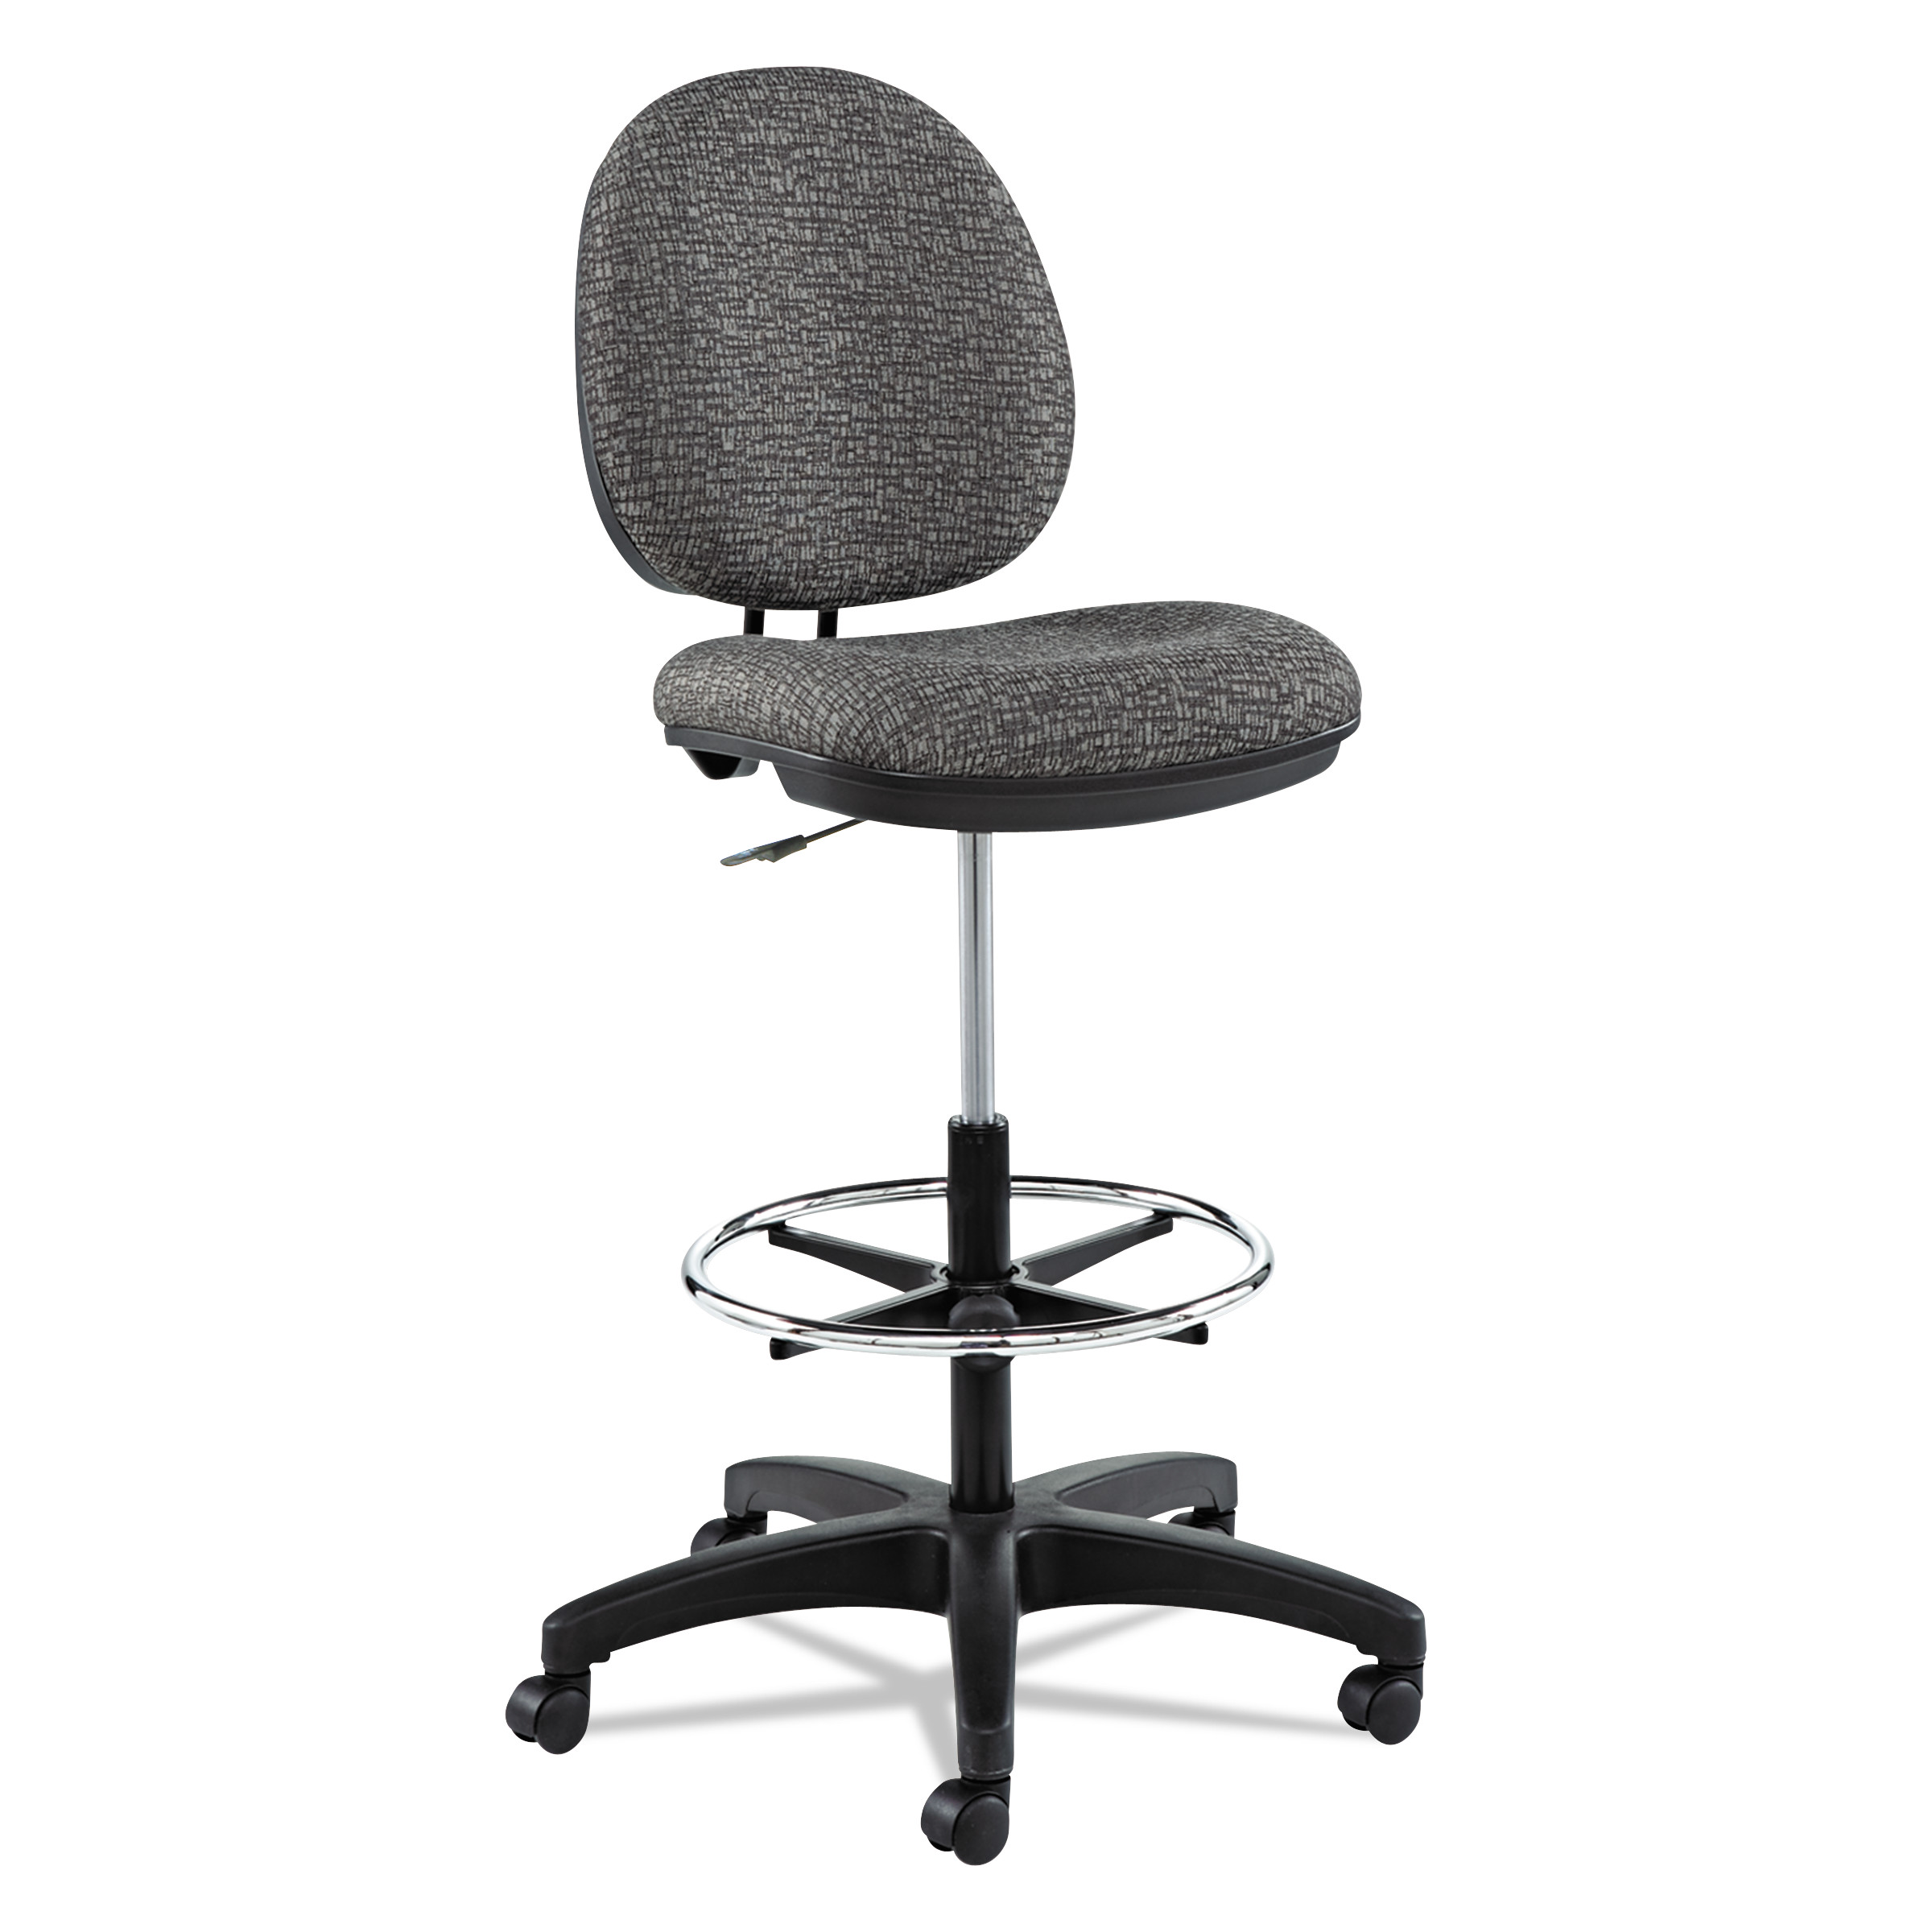  Alera ALEIN4641 Alera Interval Series Swivel Task Stool, 33.26 Seat Height, Supports up to 275 lbs., Graphite Gray Seat/Back, Black Base (ALEIN4641) 